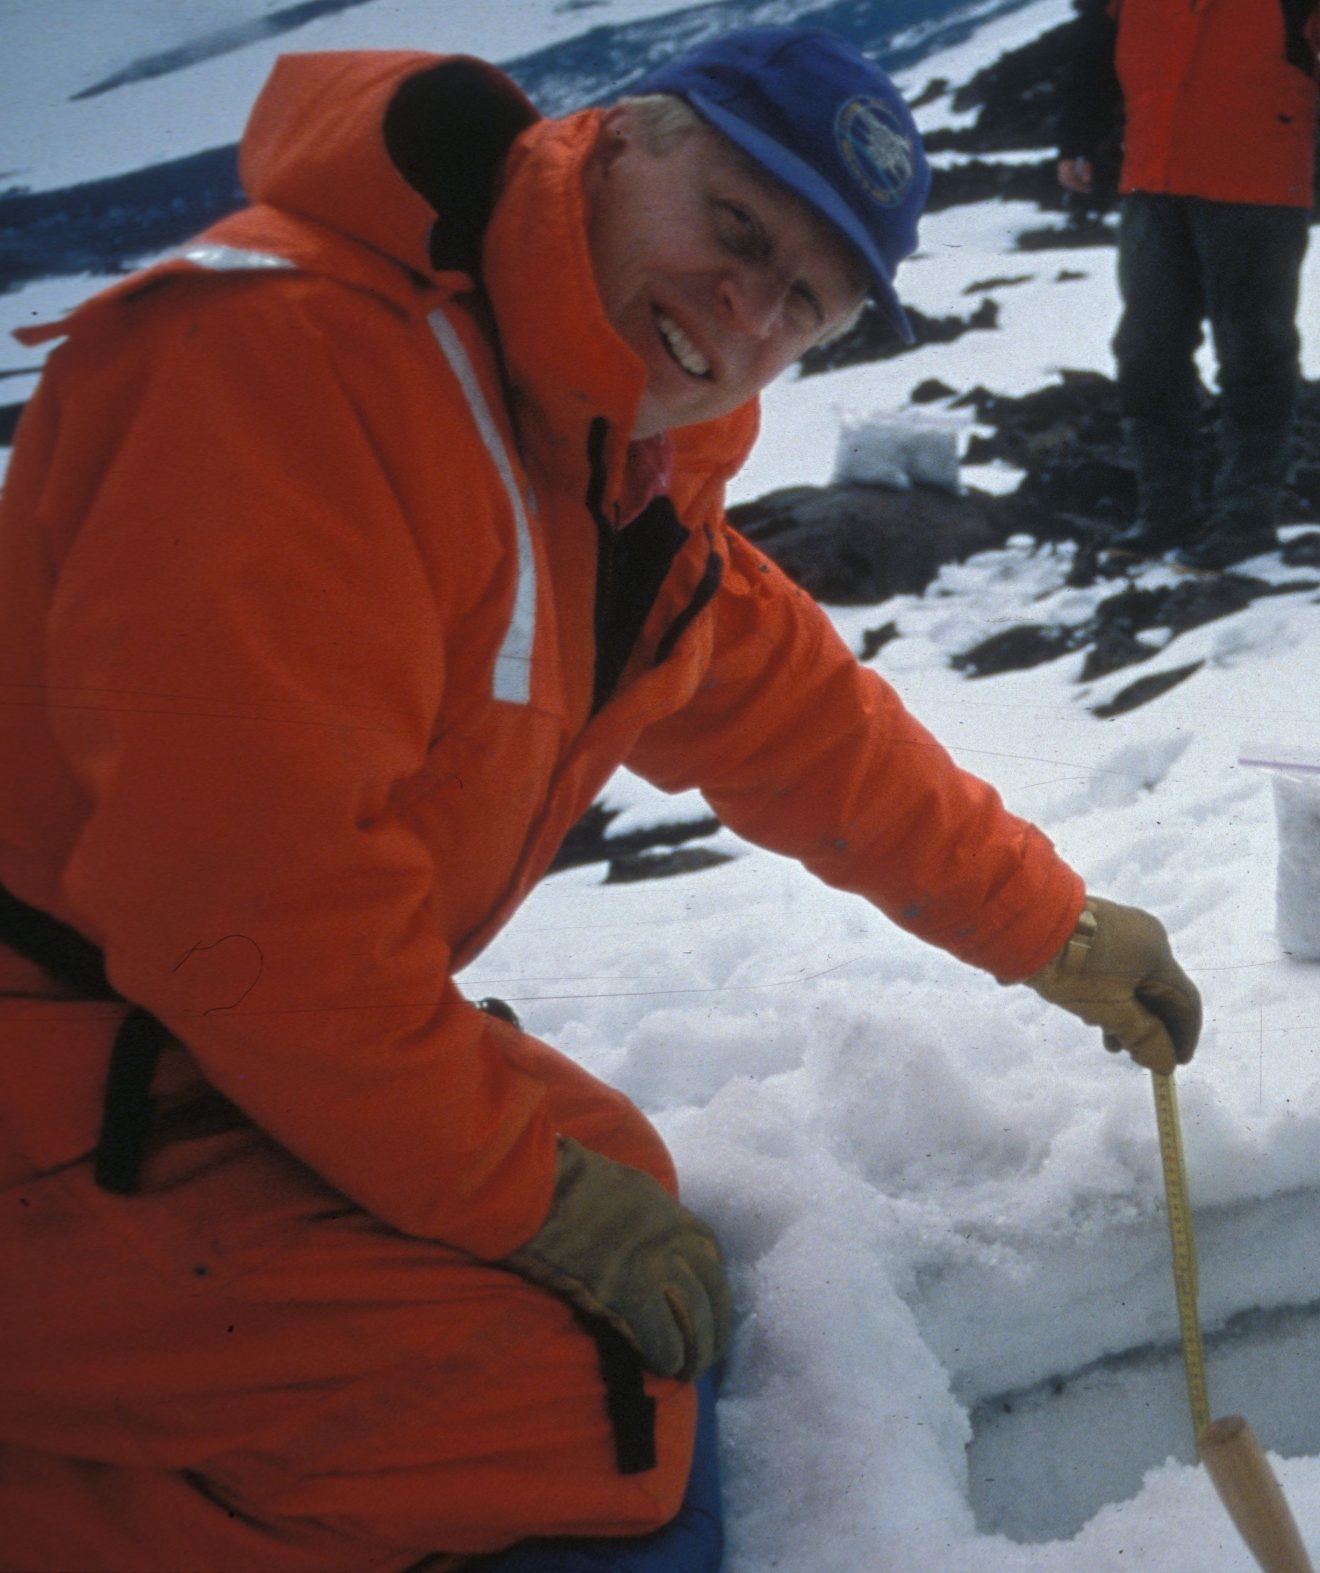 Guy Tytgat measuring ash on Shishaldin Volcano after an eruption there in the late 1990s. Alaska Volcano Observatory photo by Jim Beget.